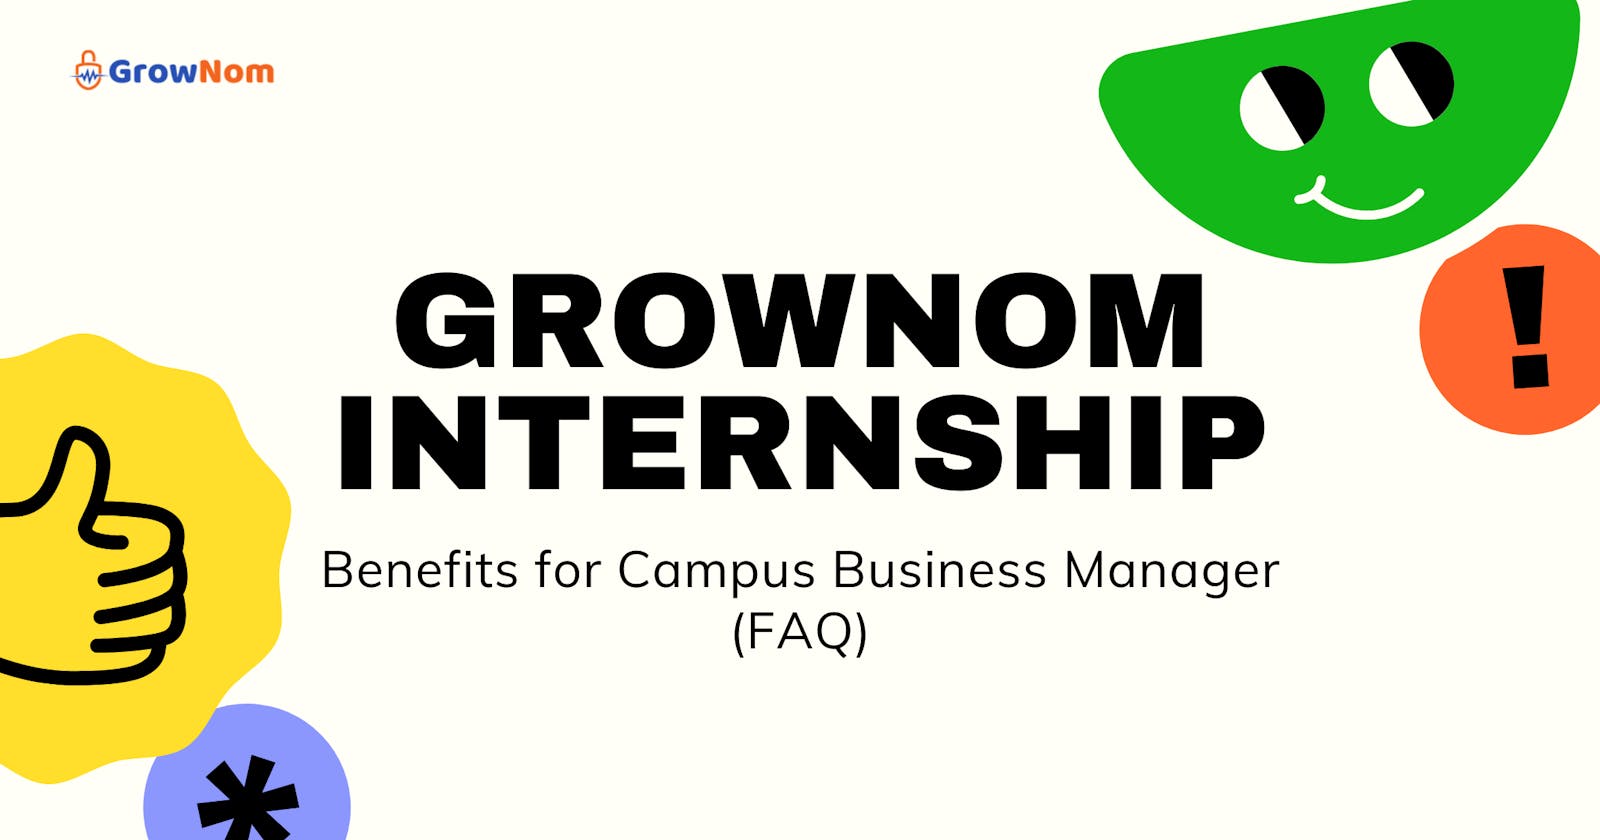 Benefits for Campus Business Manager (FAQ)